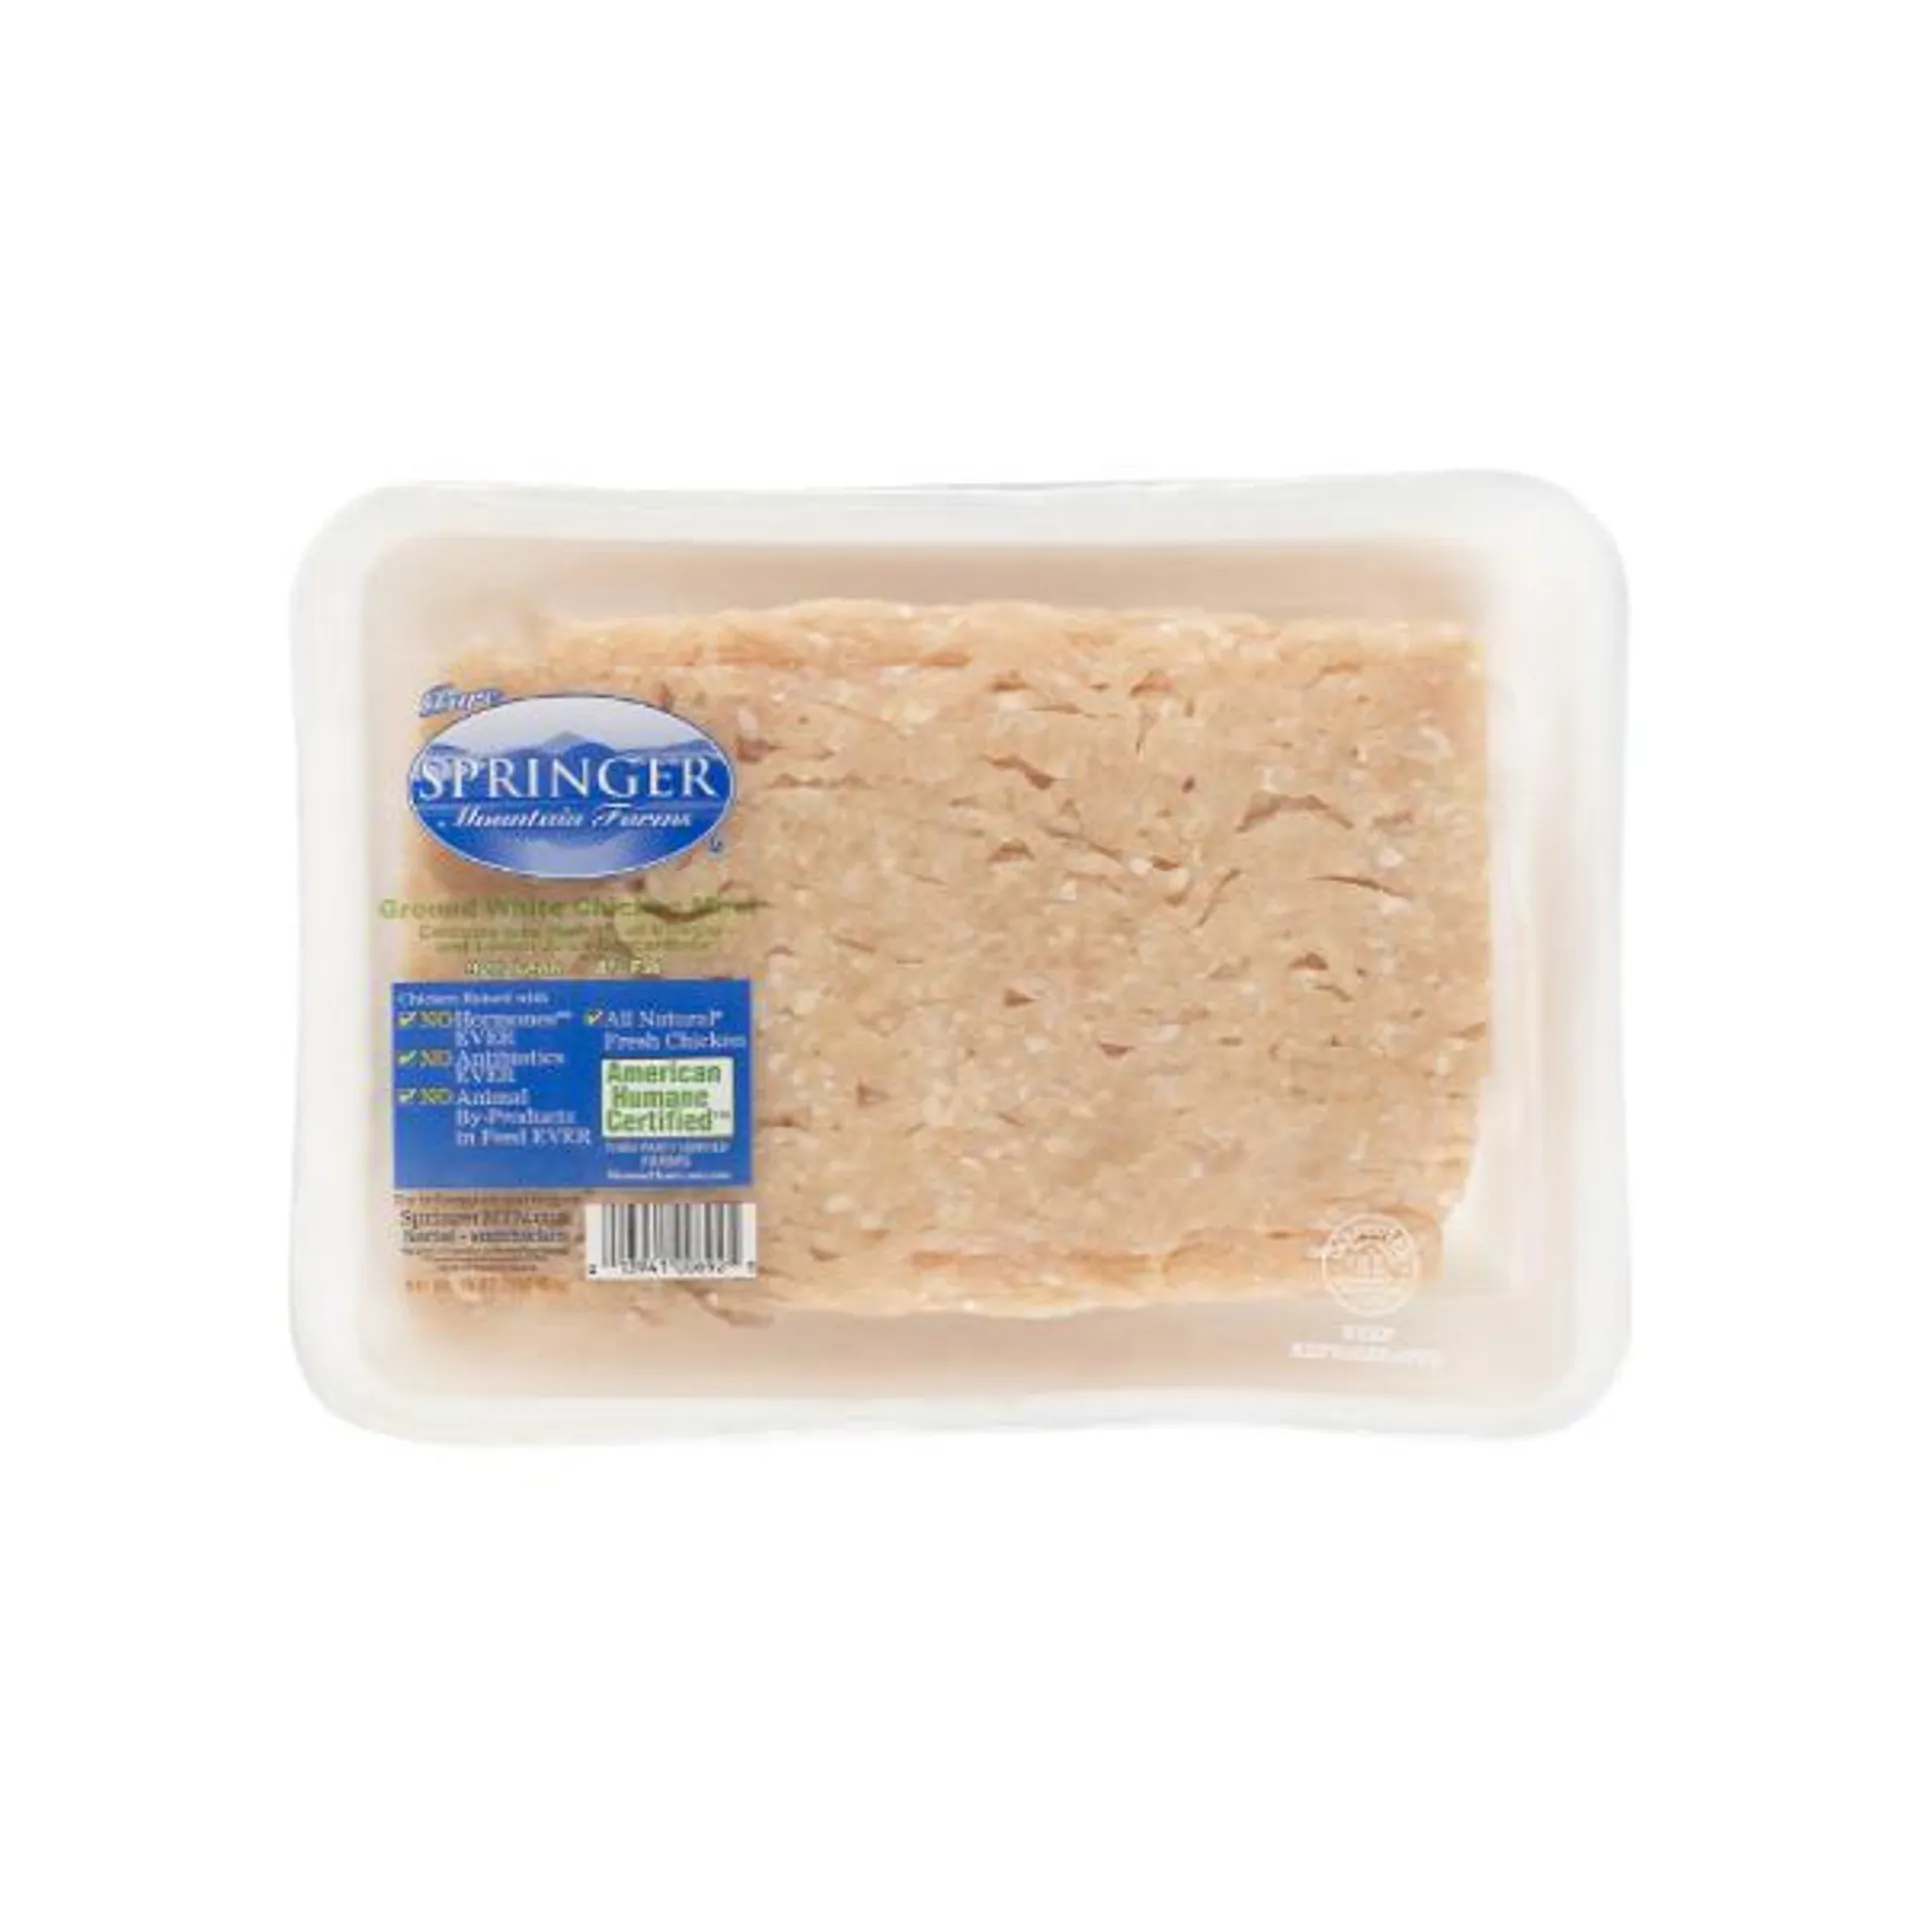 Antibiotic Free Ground Chicken 92% Fat Free - 16 Ounce